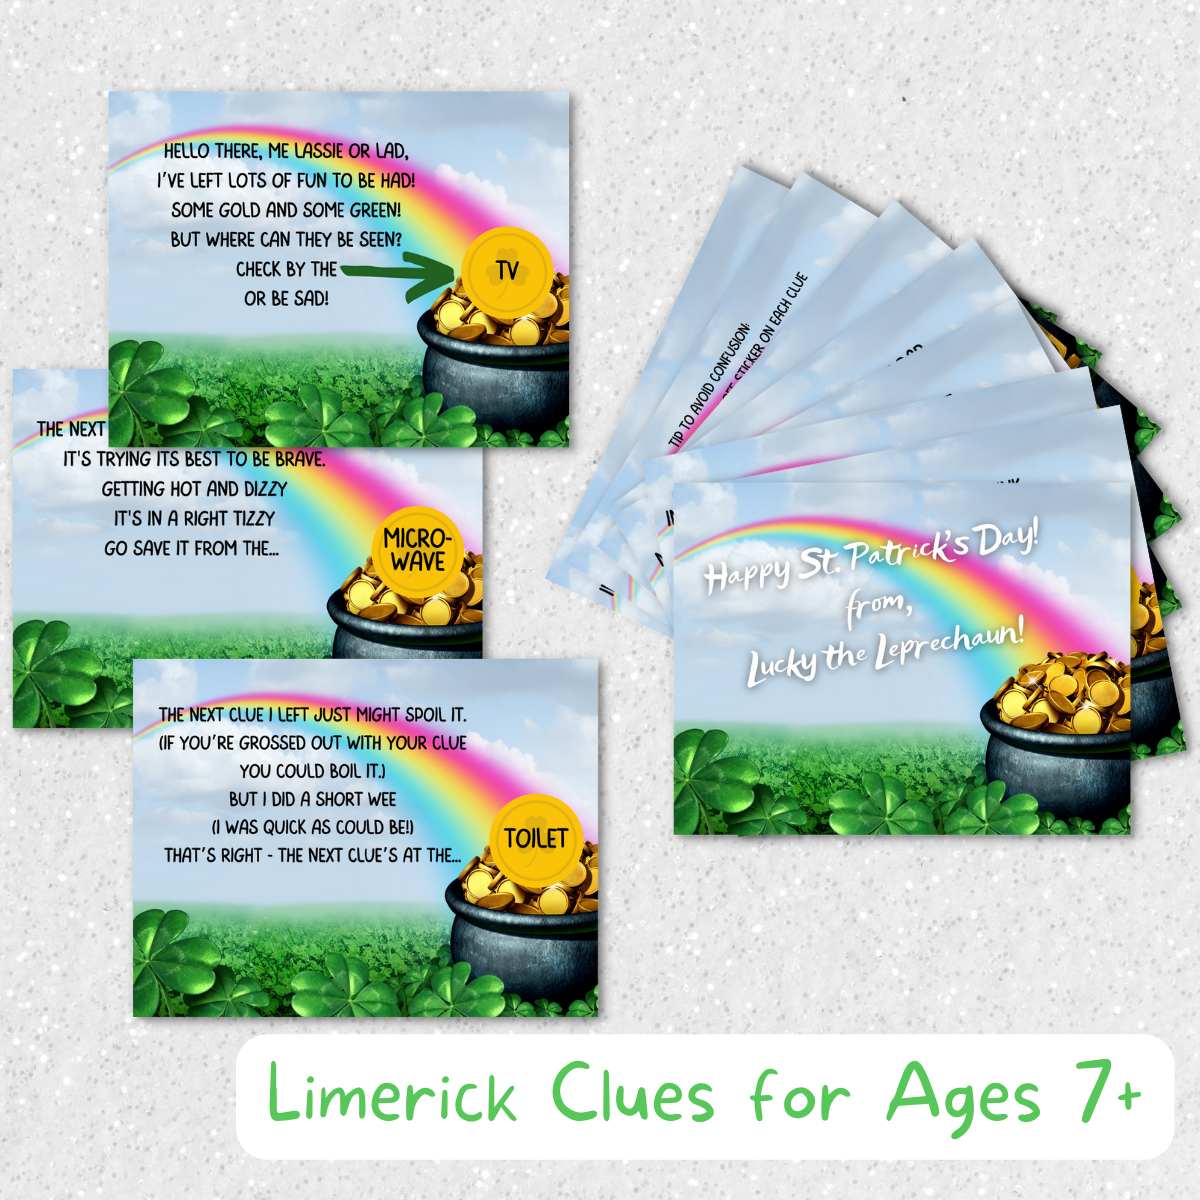 Treasure hunt cards display a rainbow leading to a pot of gold, where a gold scratch-off sticker reveals the location of the treasure hunt's next clue in limerick form.